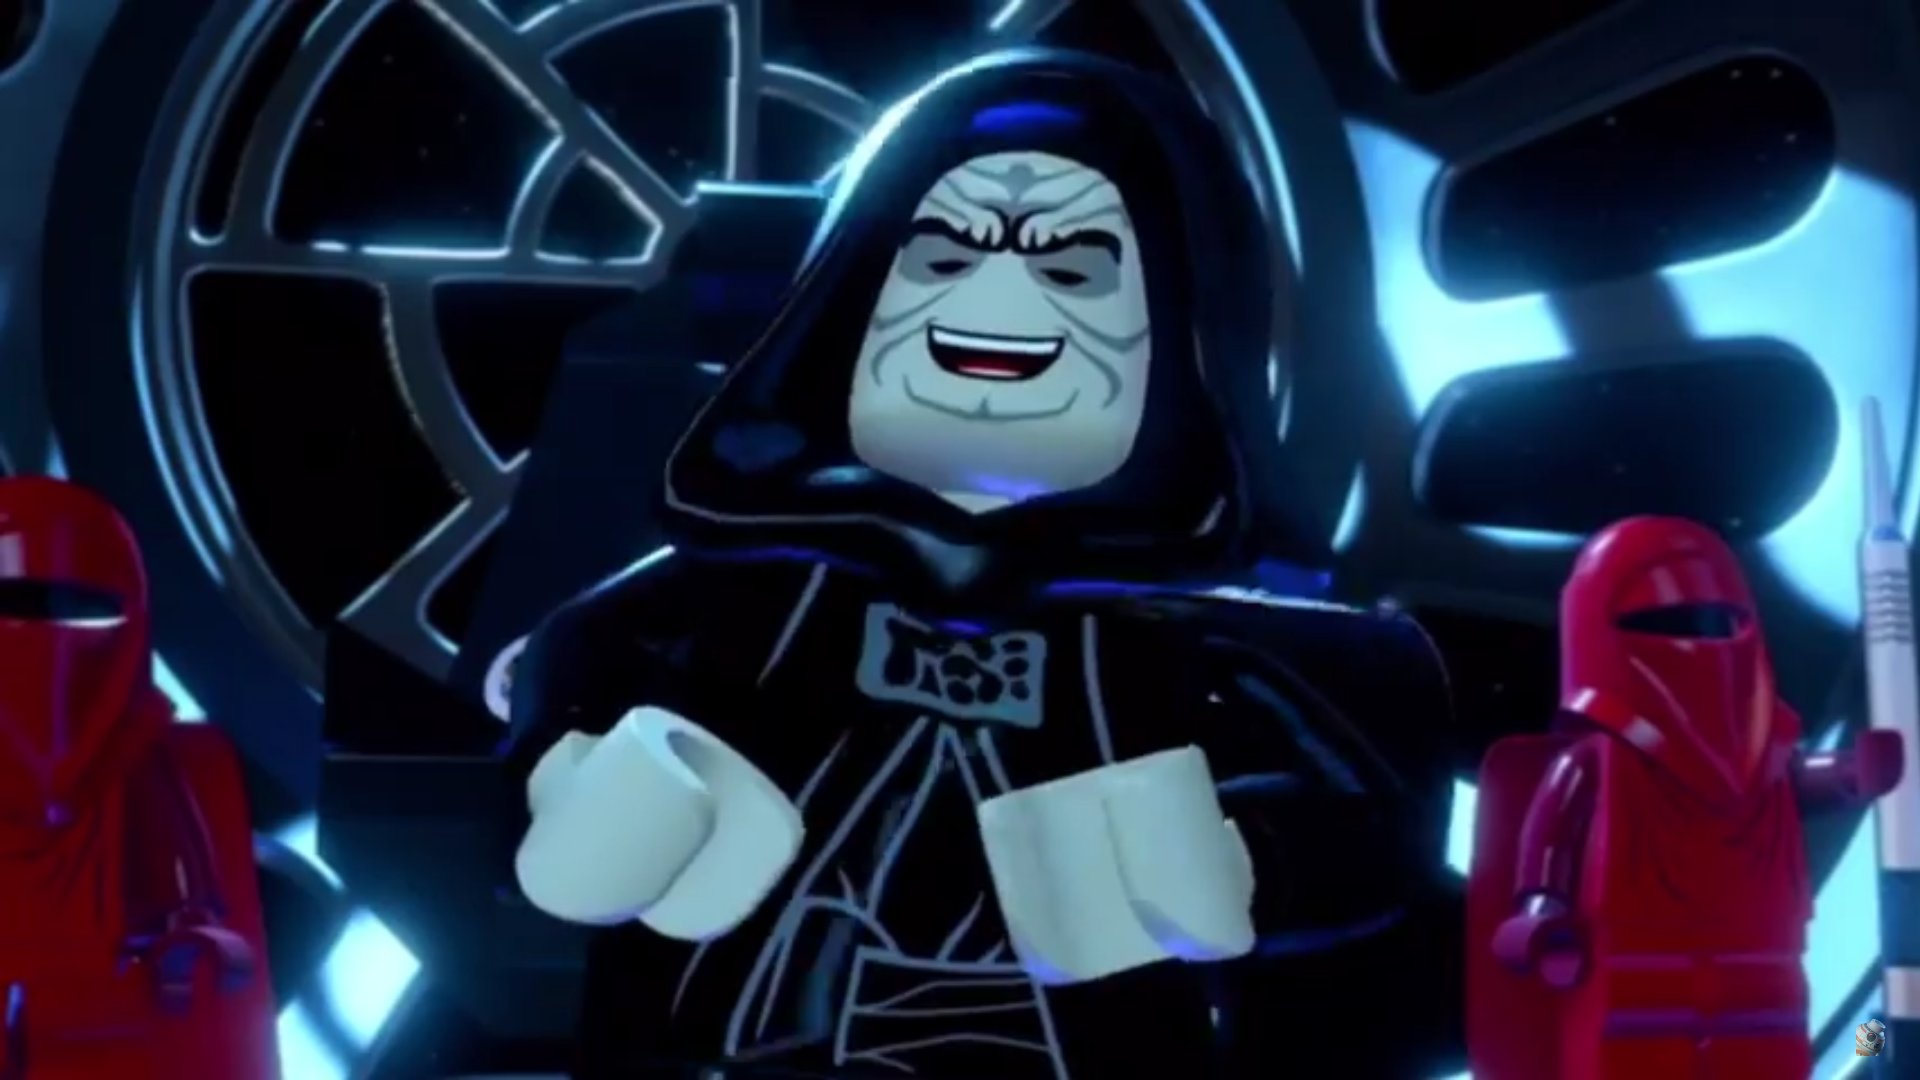 The Emperor in LEGO Star Wars mobile.